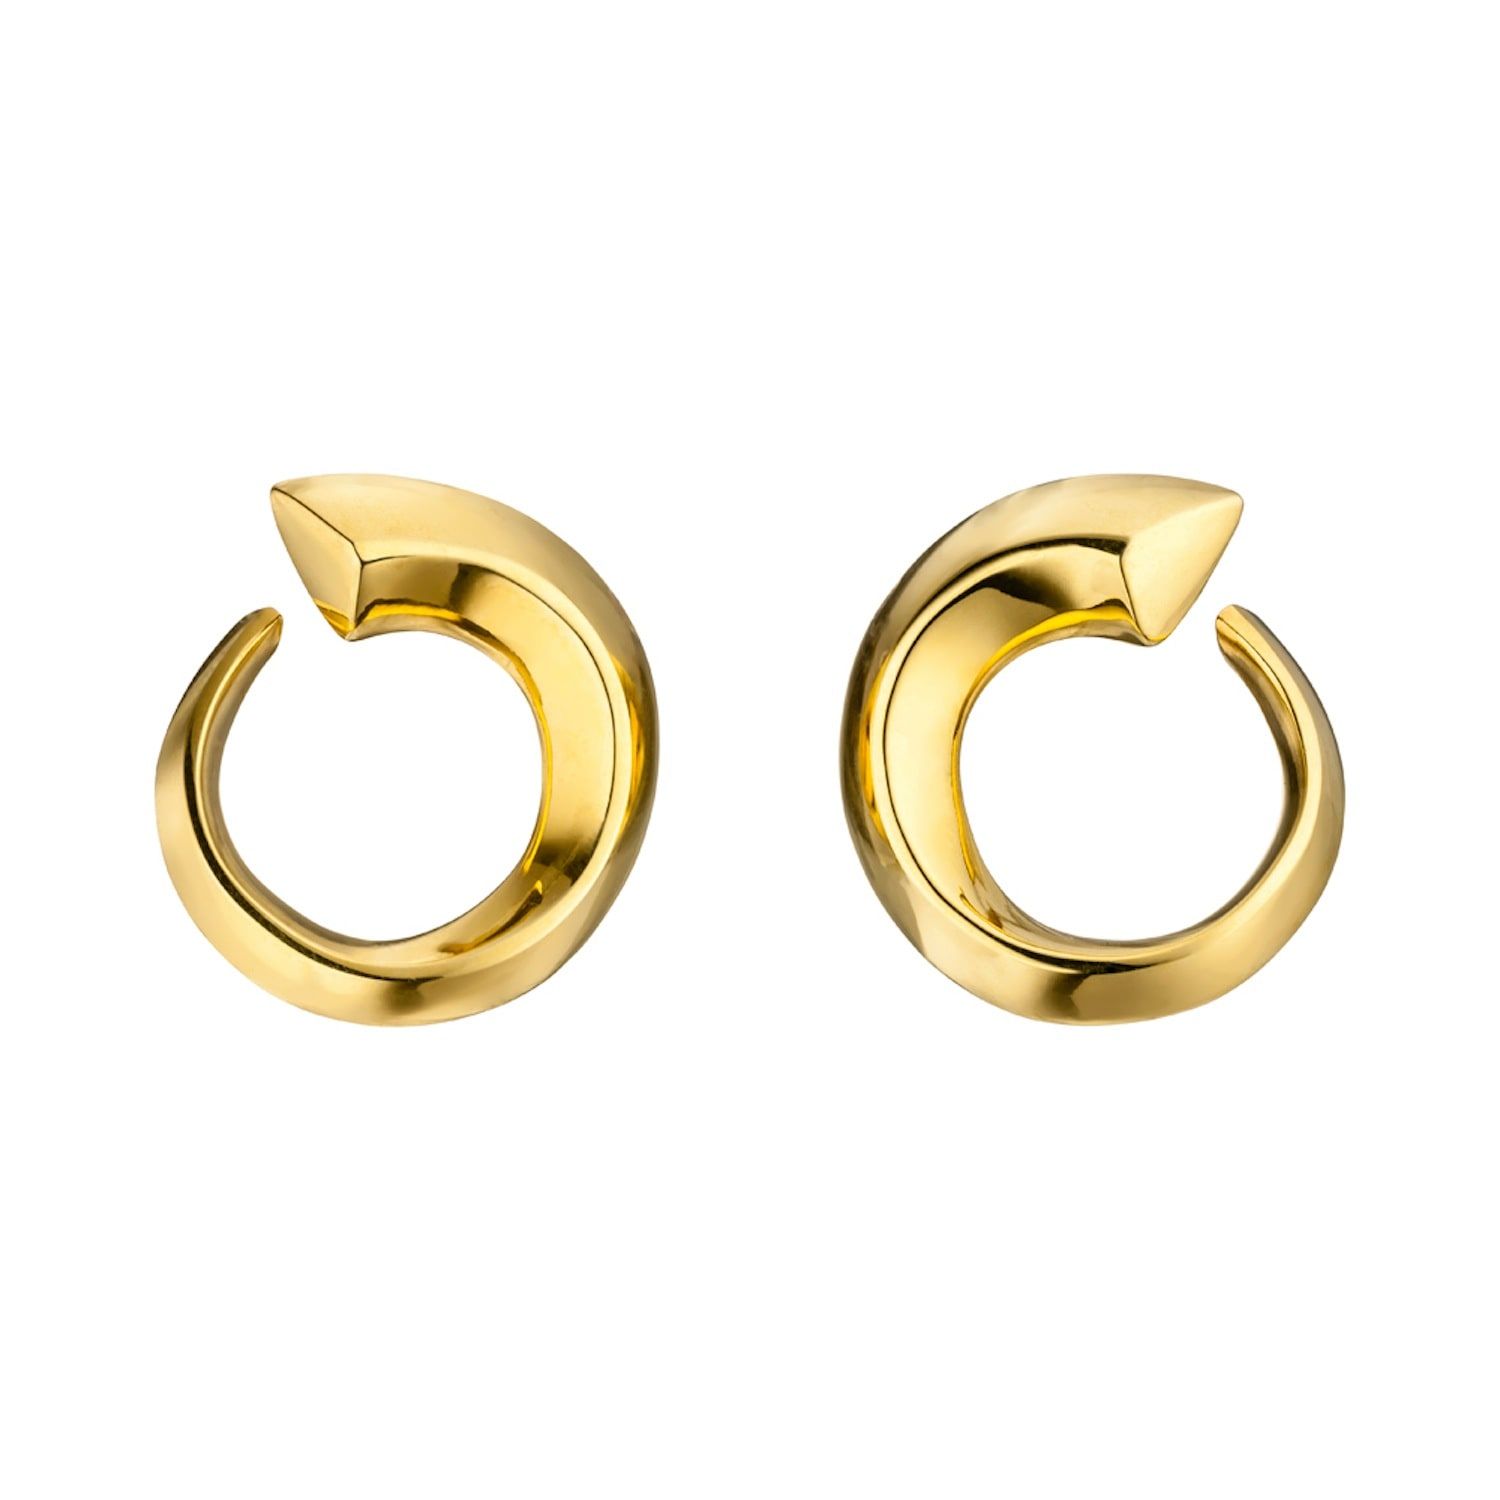 Nina Kastens Jewelry - Earrings Stella Gold | Wolf and Badger (Global excl. US)